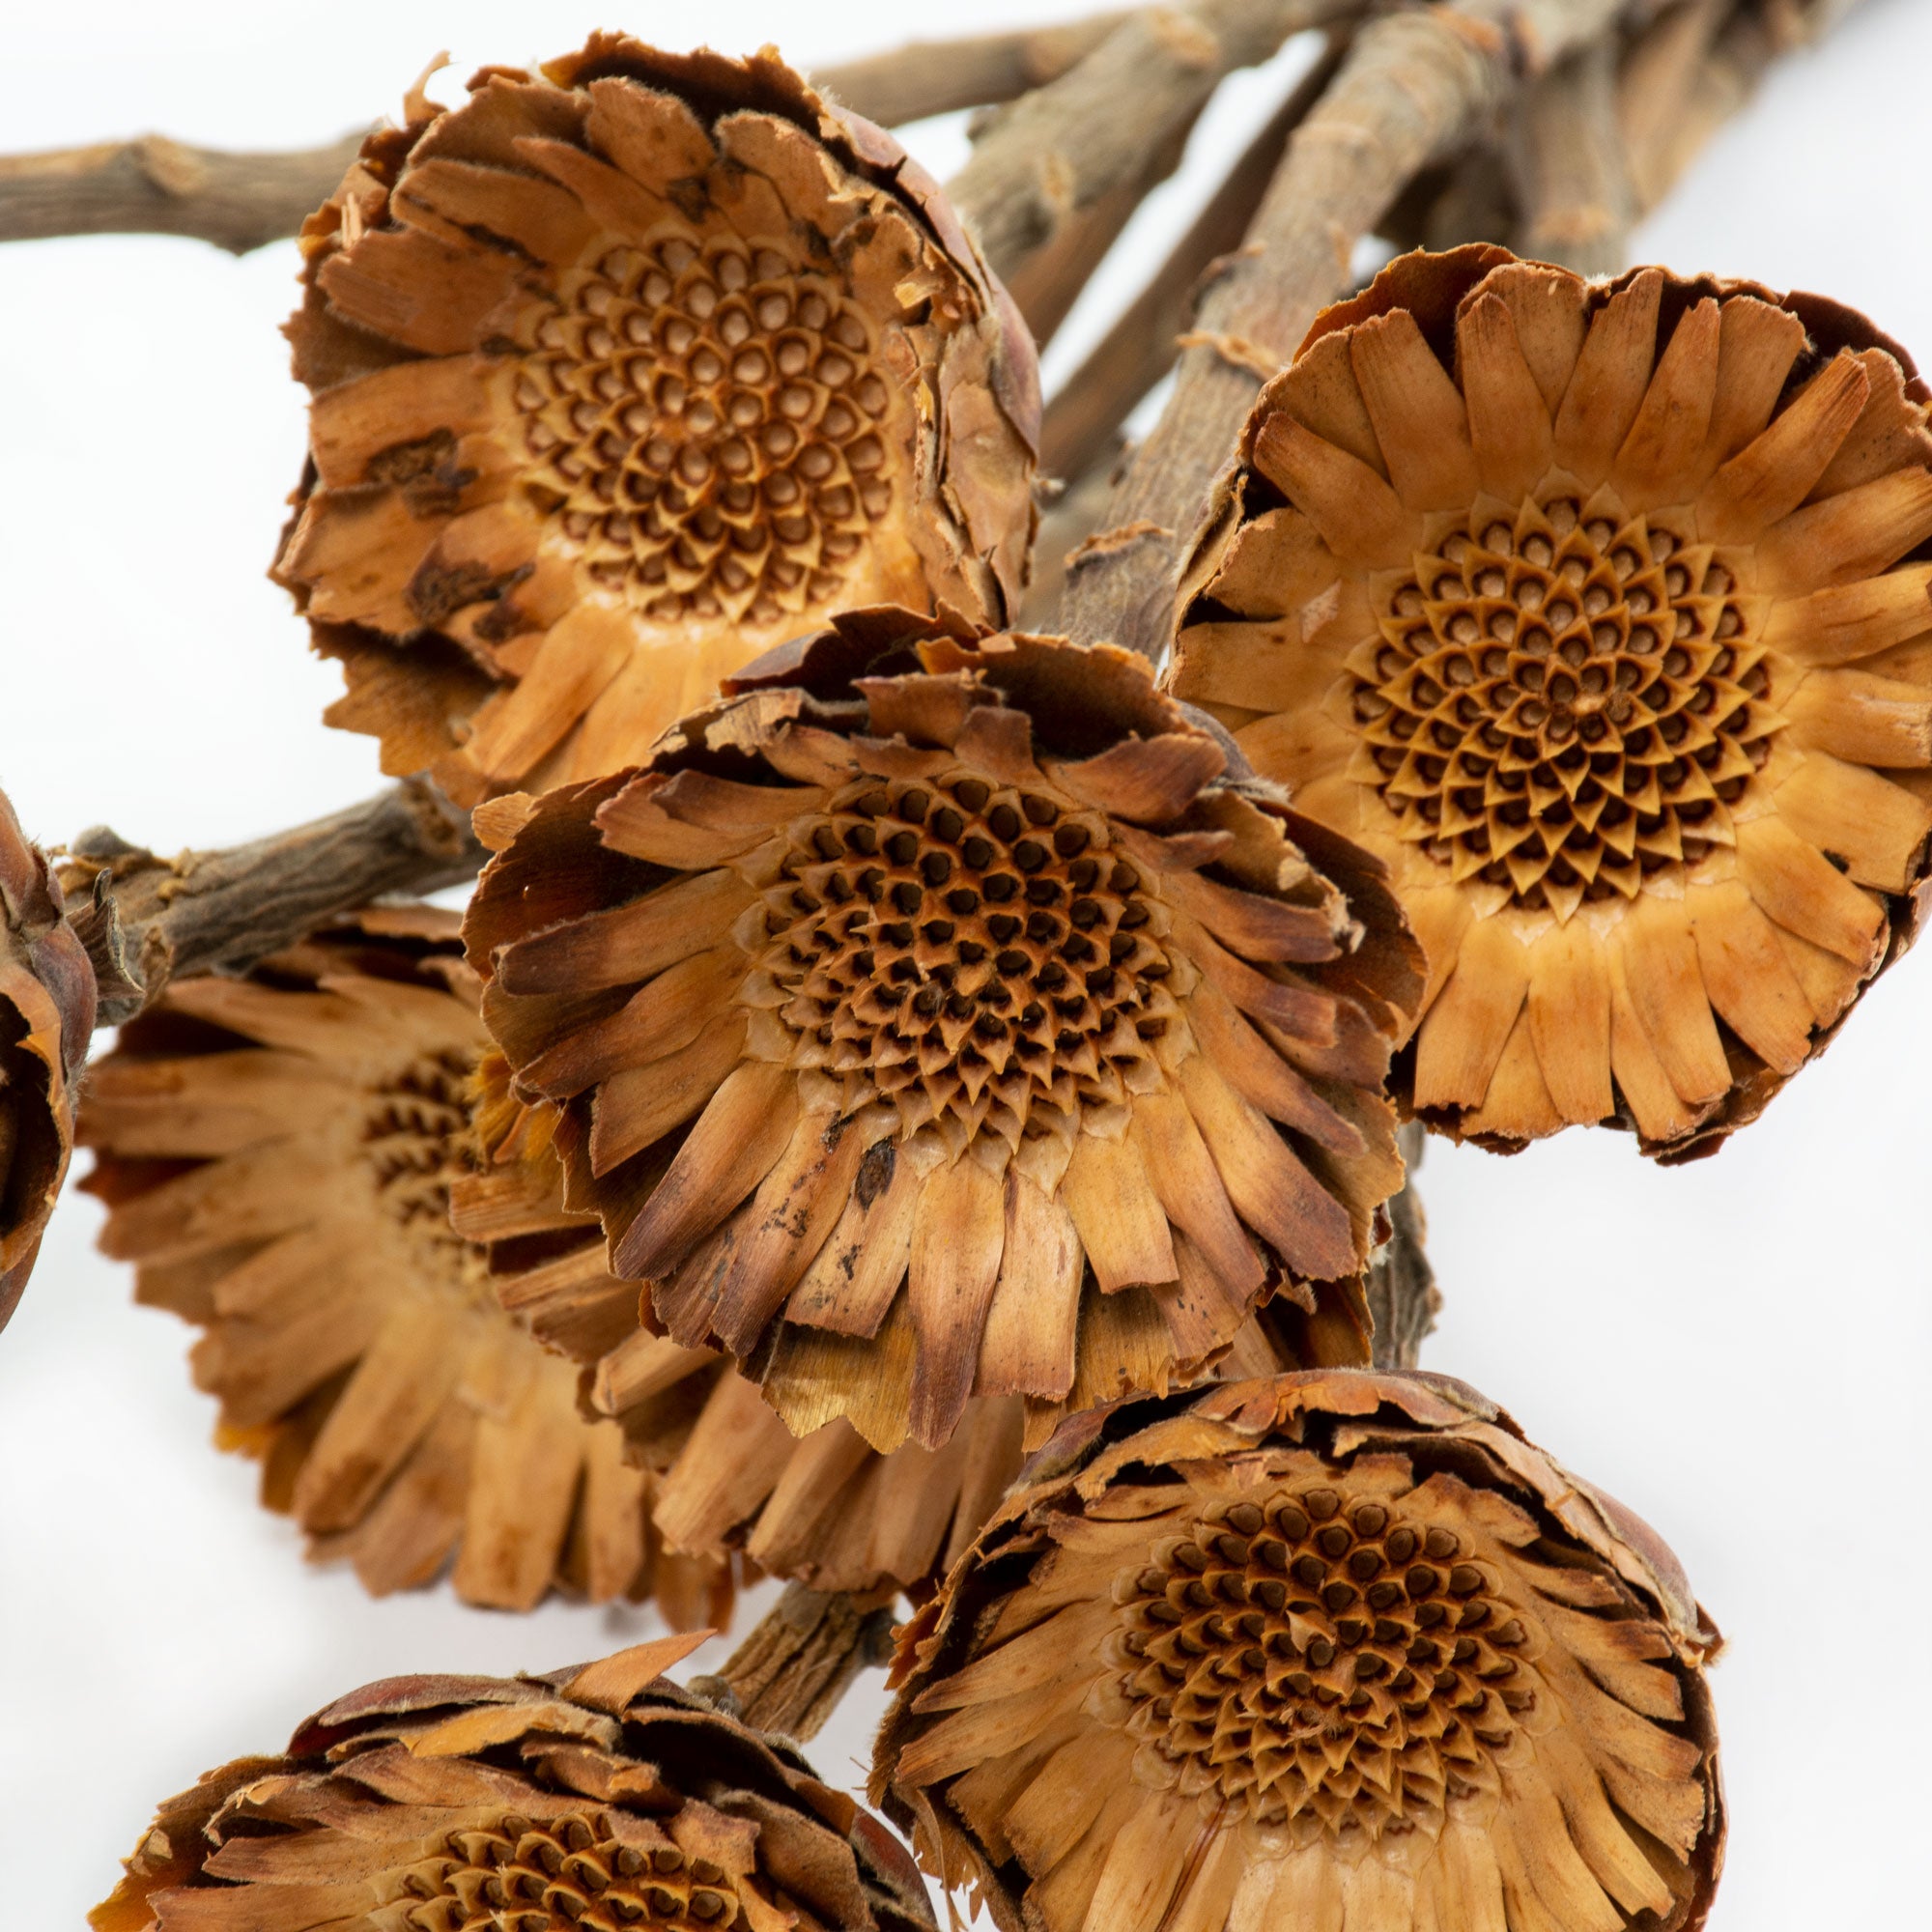 This image shows a bunch of 10 Protea Compacta stems, against a white background